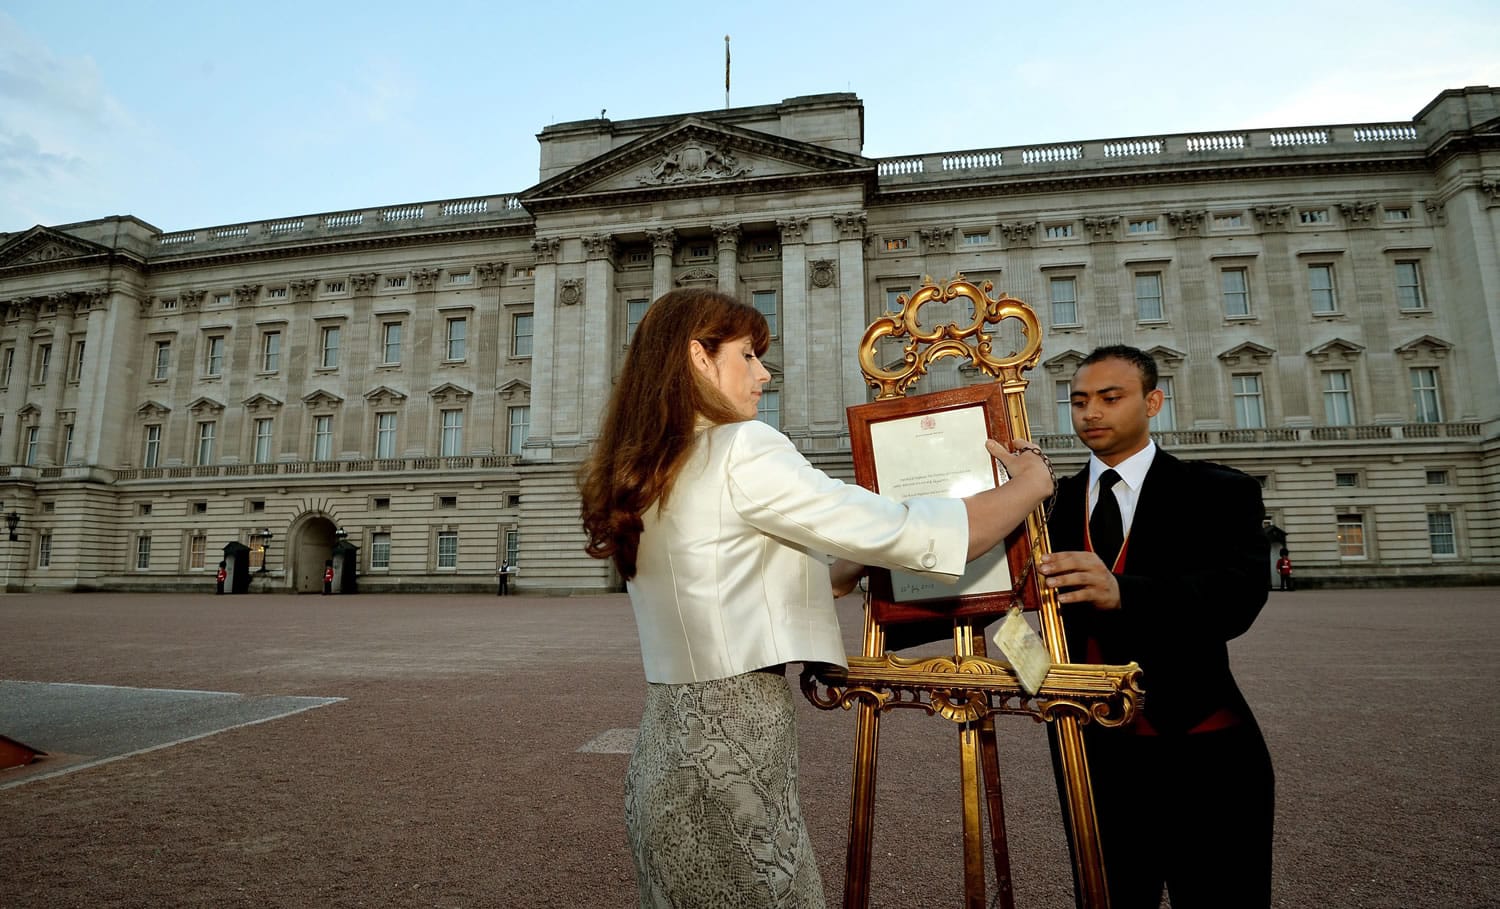 The Queen's Press Secretary, Ailsa Anderson, and Badar Azim, a footman, place an official document to announce the birth of a baby boy to William and Kate, the Duke and Duchess of Cambridge, in the forecourt of Buckingham Palace in London on Monday.